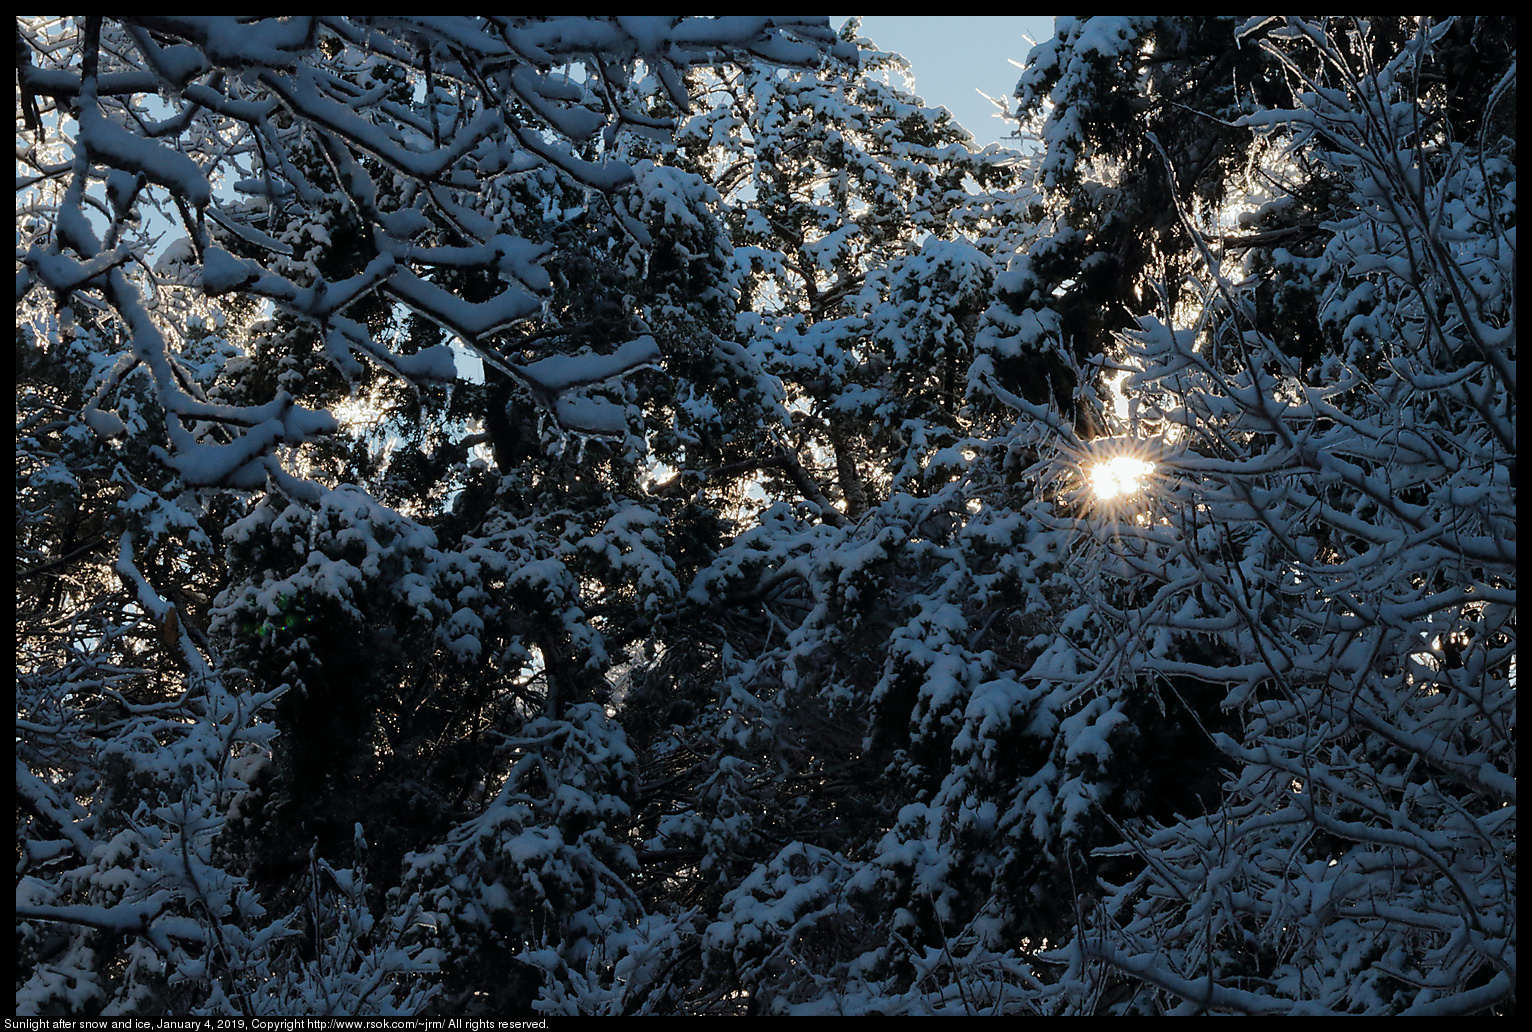 Sunlight after snow and ice, January 4, 2019